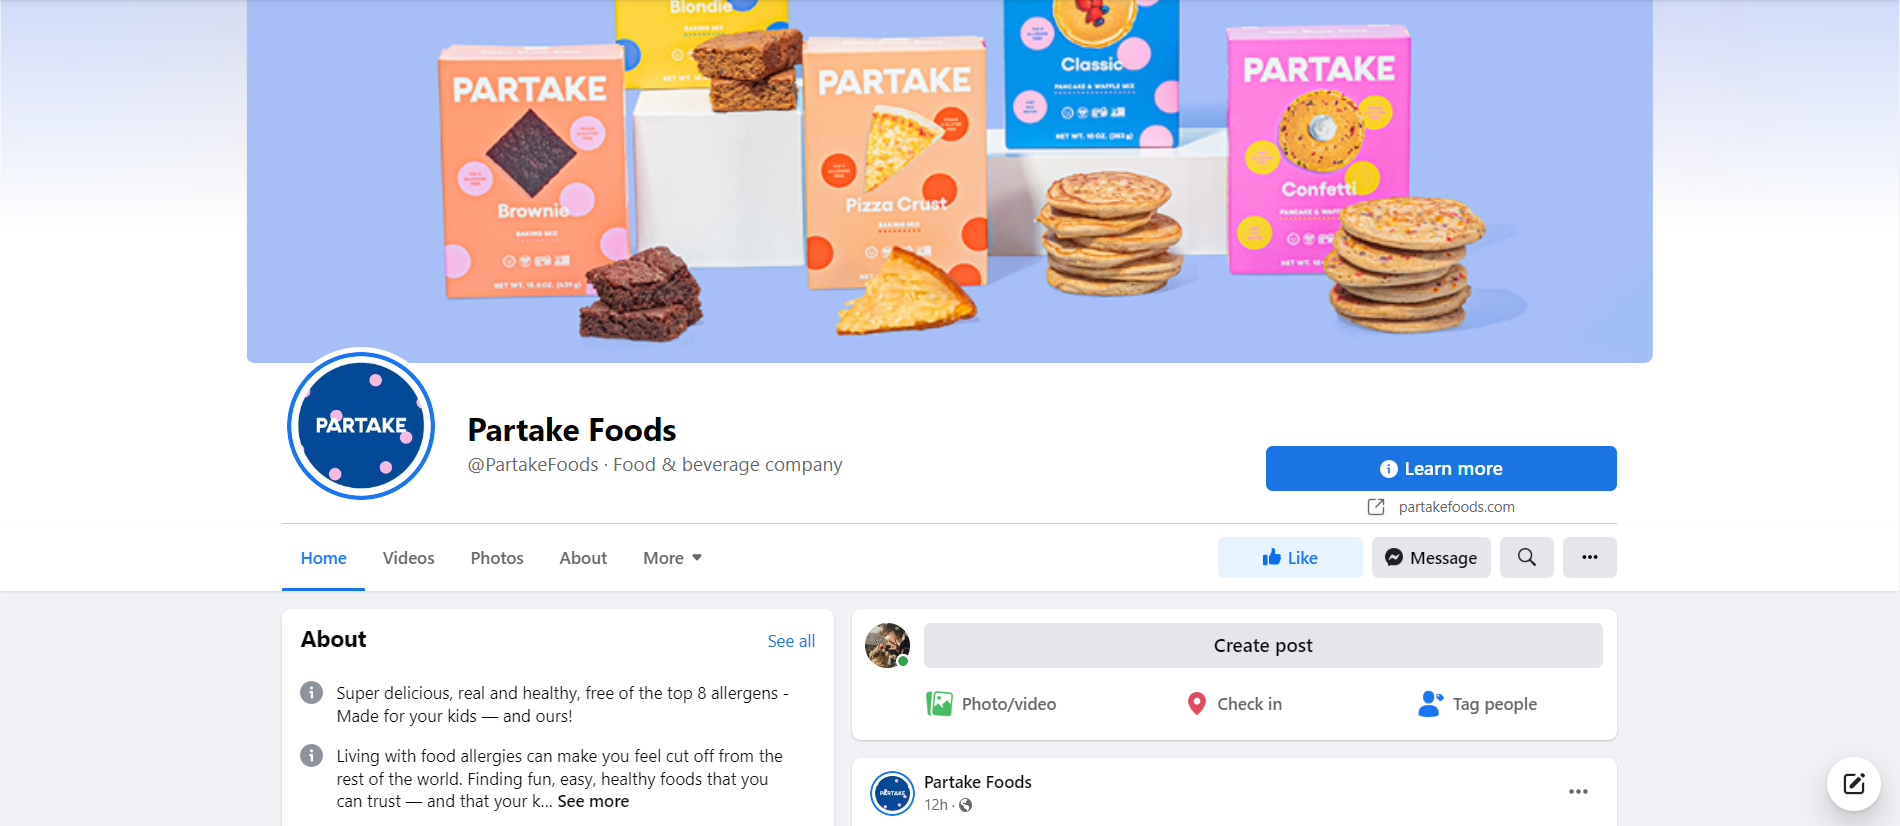 Shopify Facebook Store Example: Partake Foods